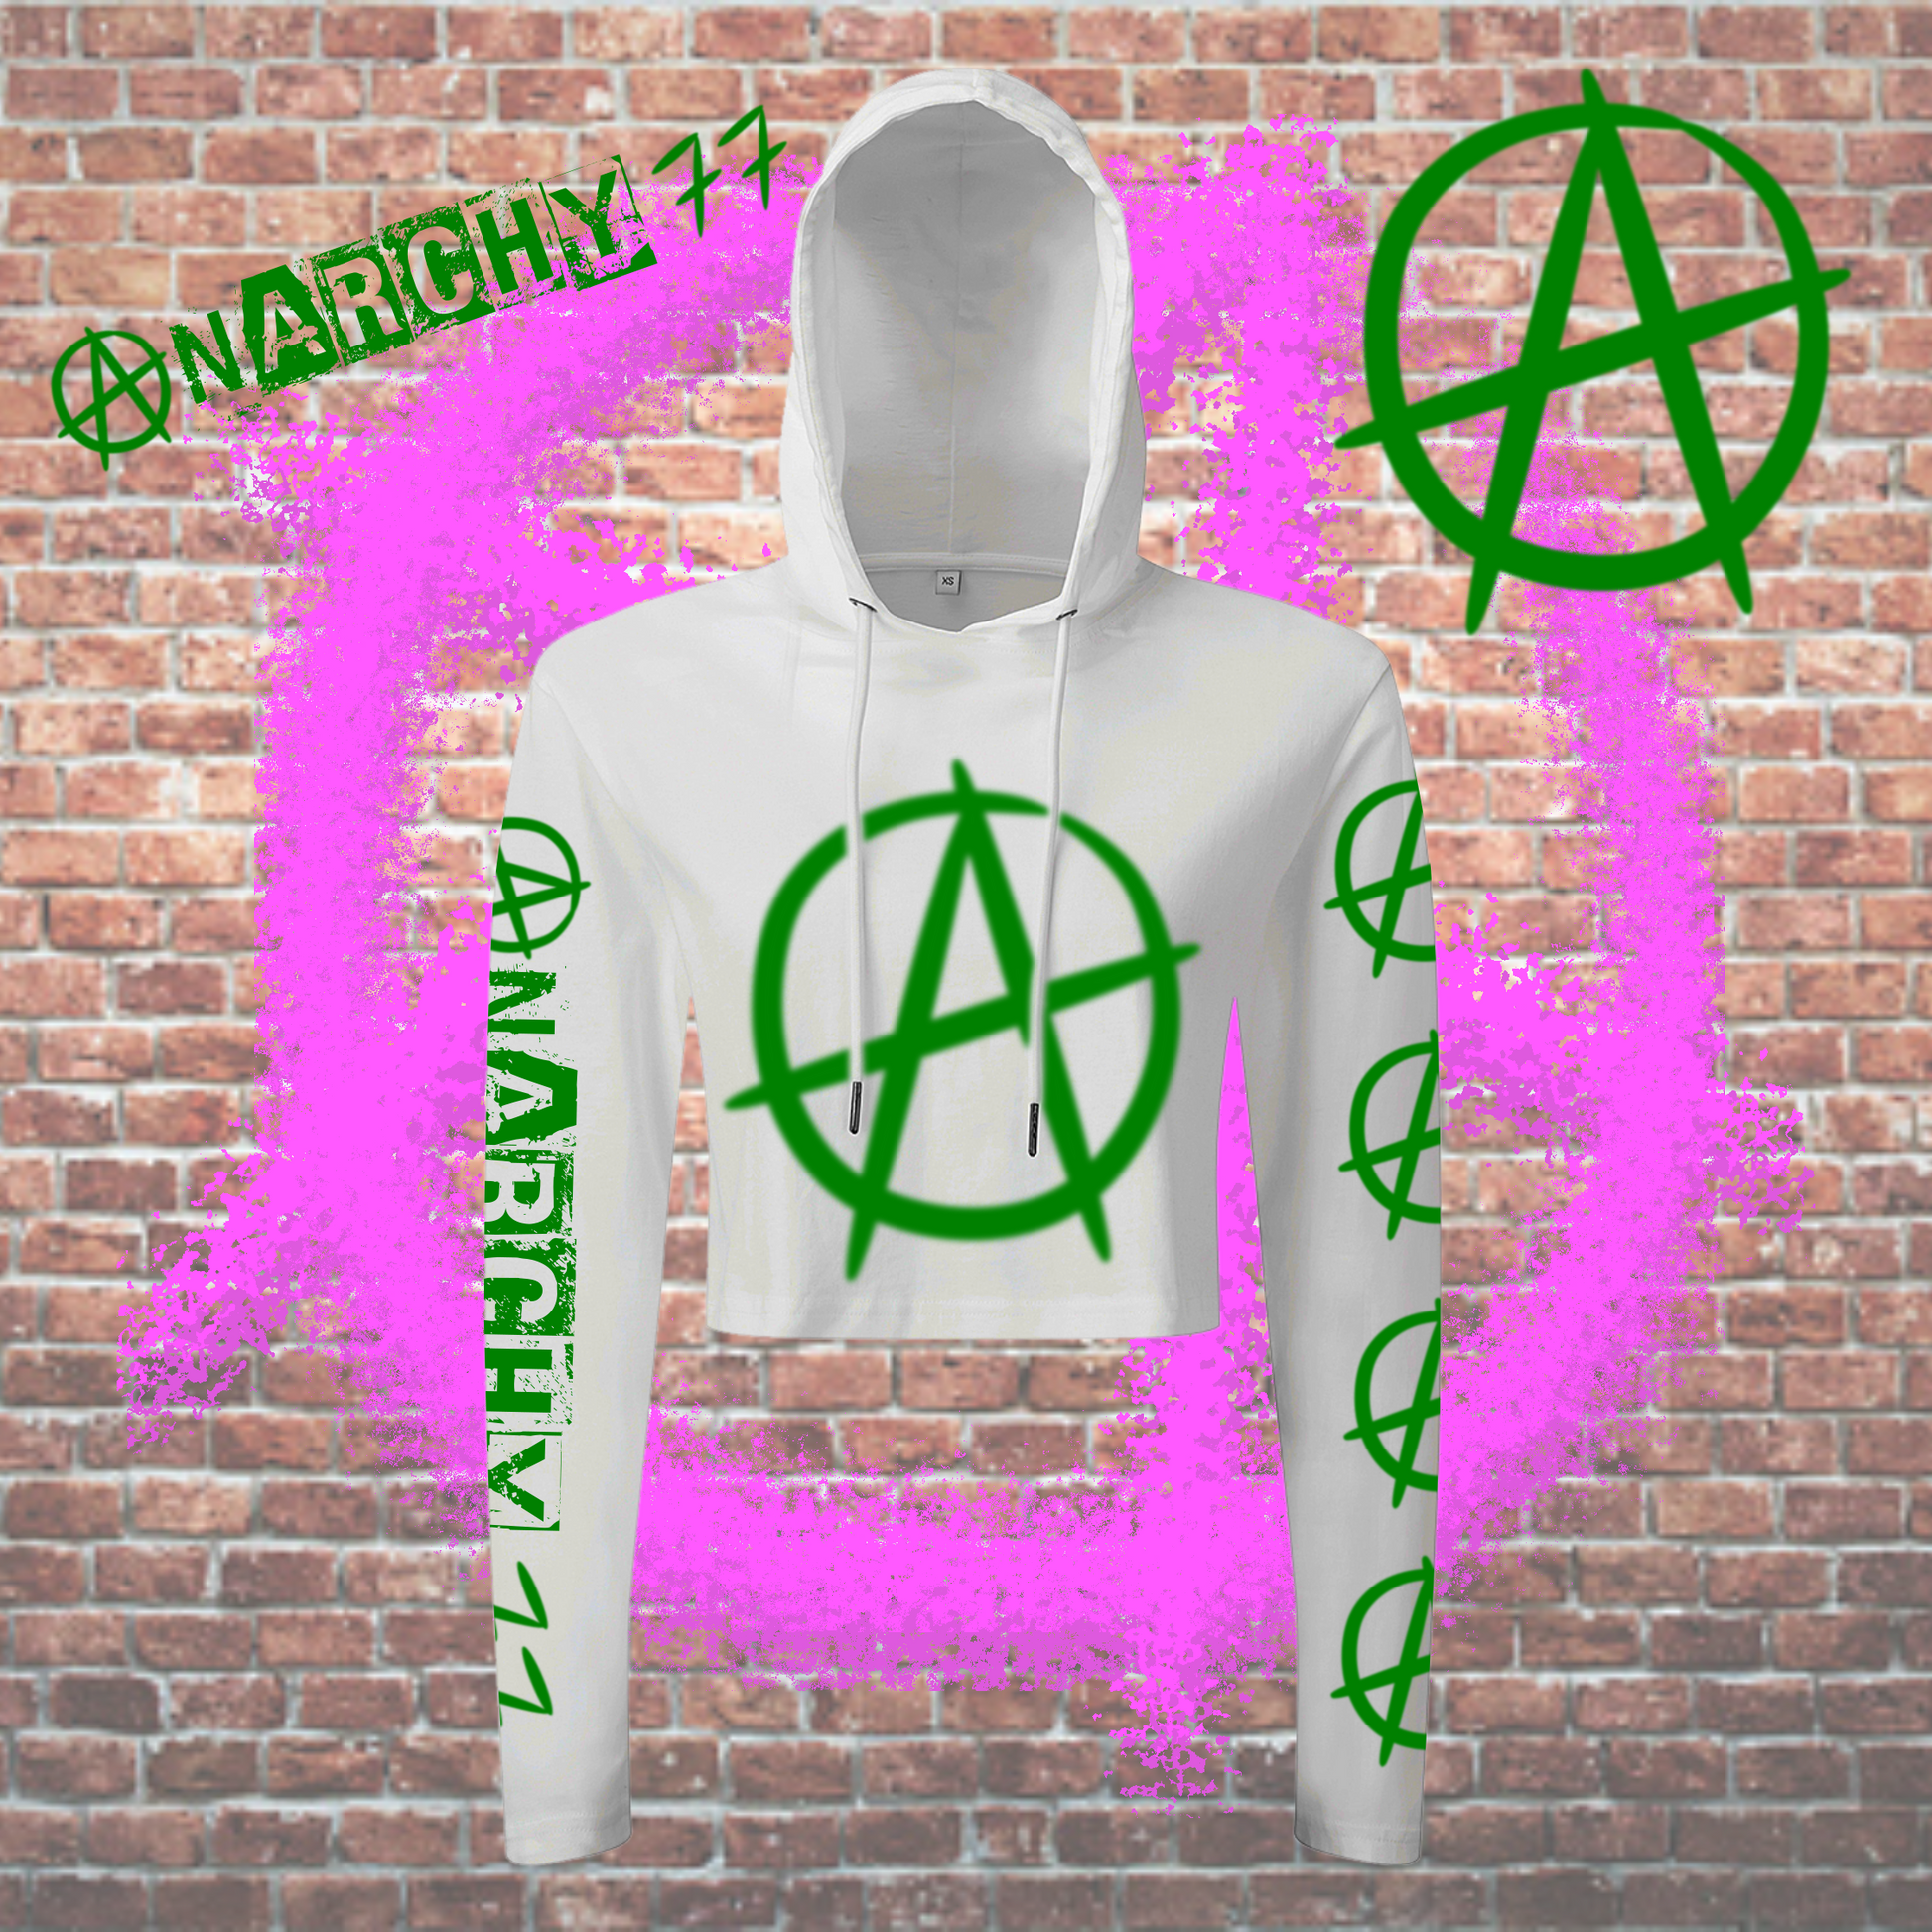 Anarchy 77 Cropped Hooded Long Sleeve T-Shirt green print